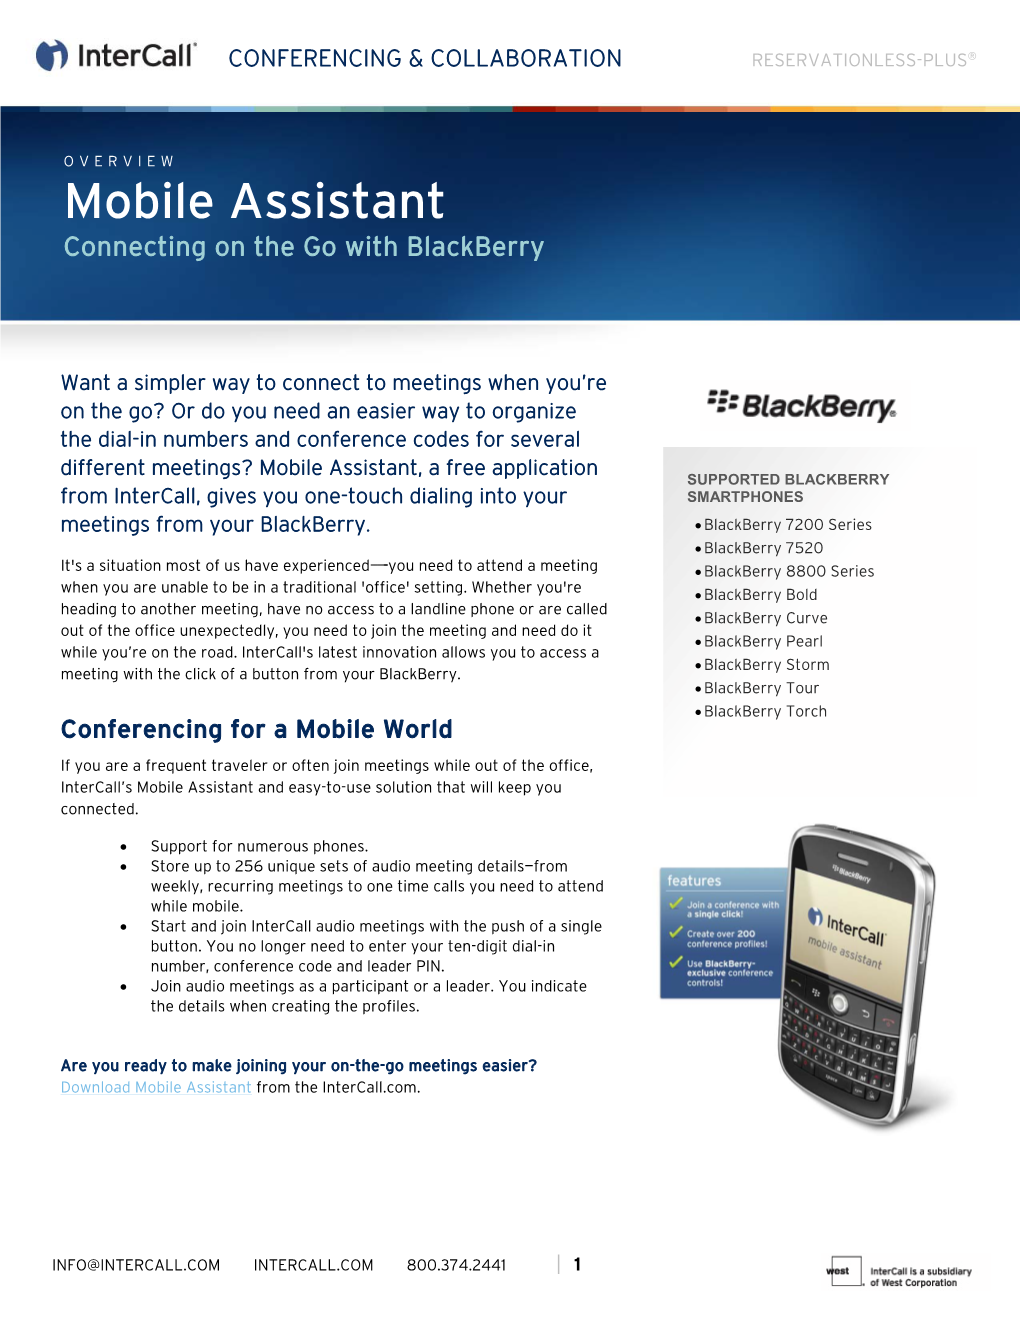 Mobile Assistant Connecting on the Go with Blackberry